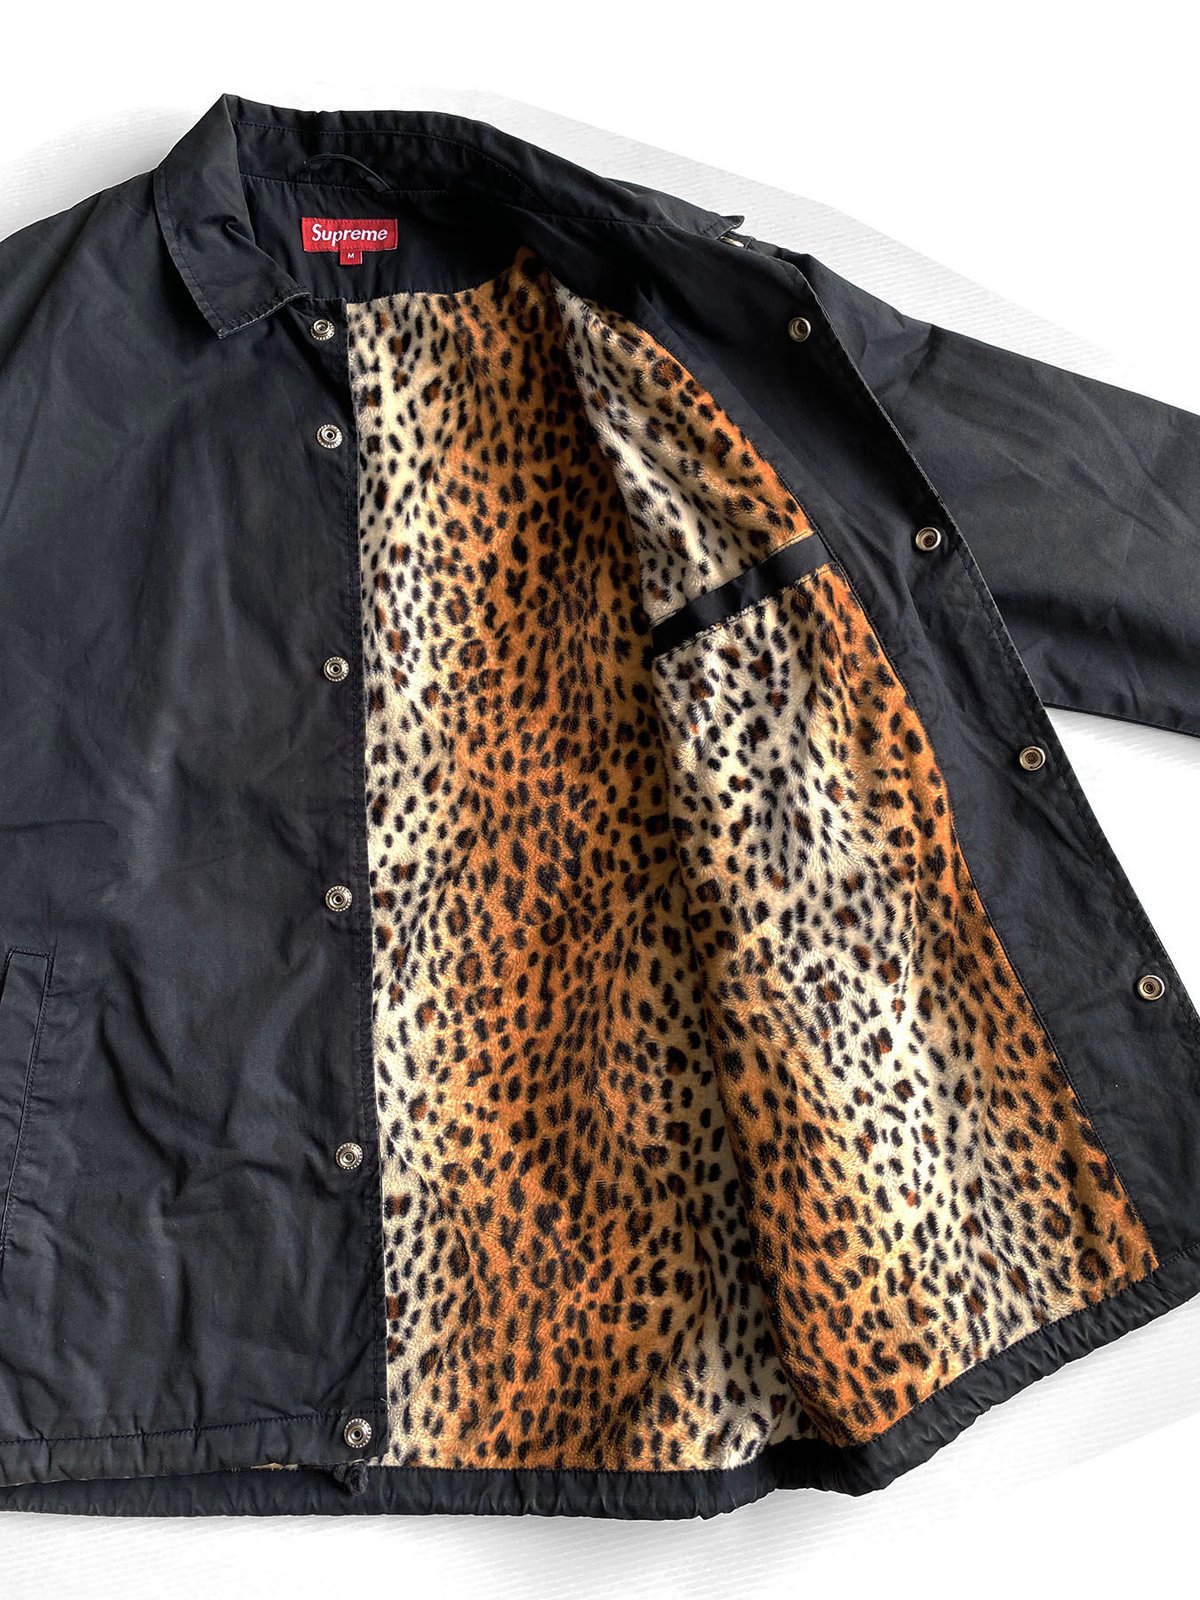 Leopard Lined Coaches Jacket by supreme